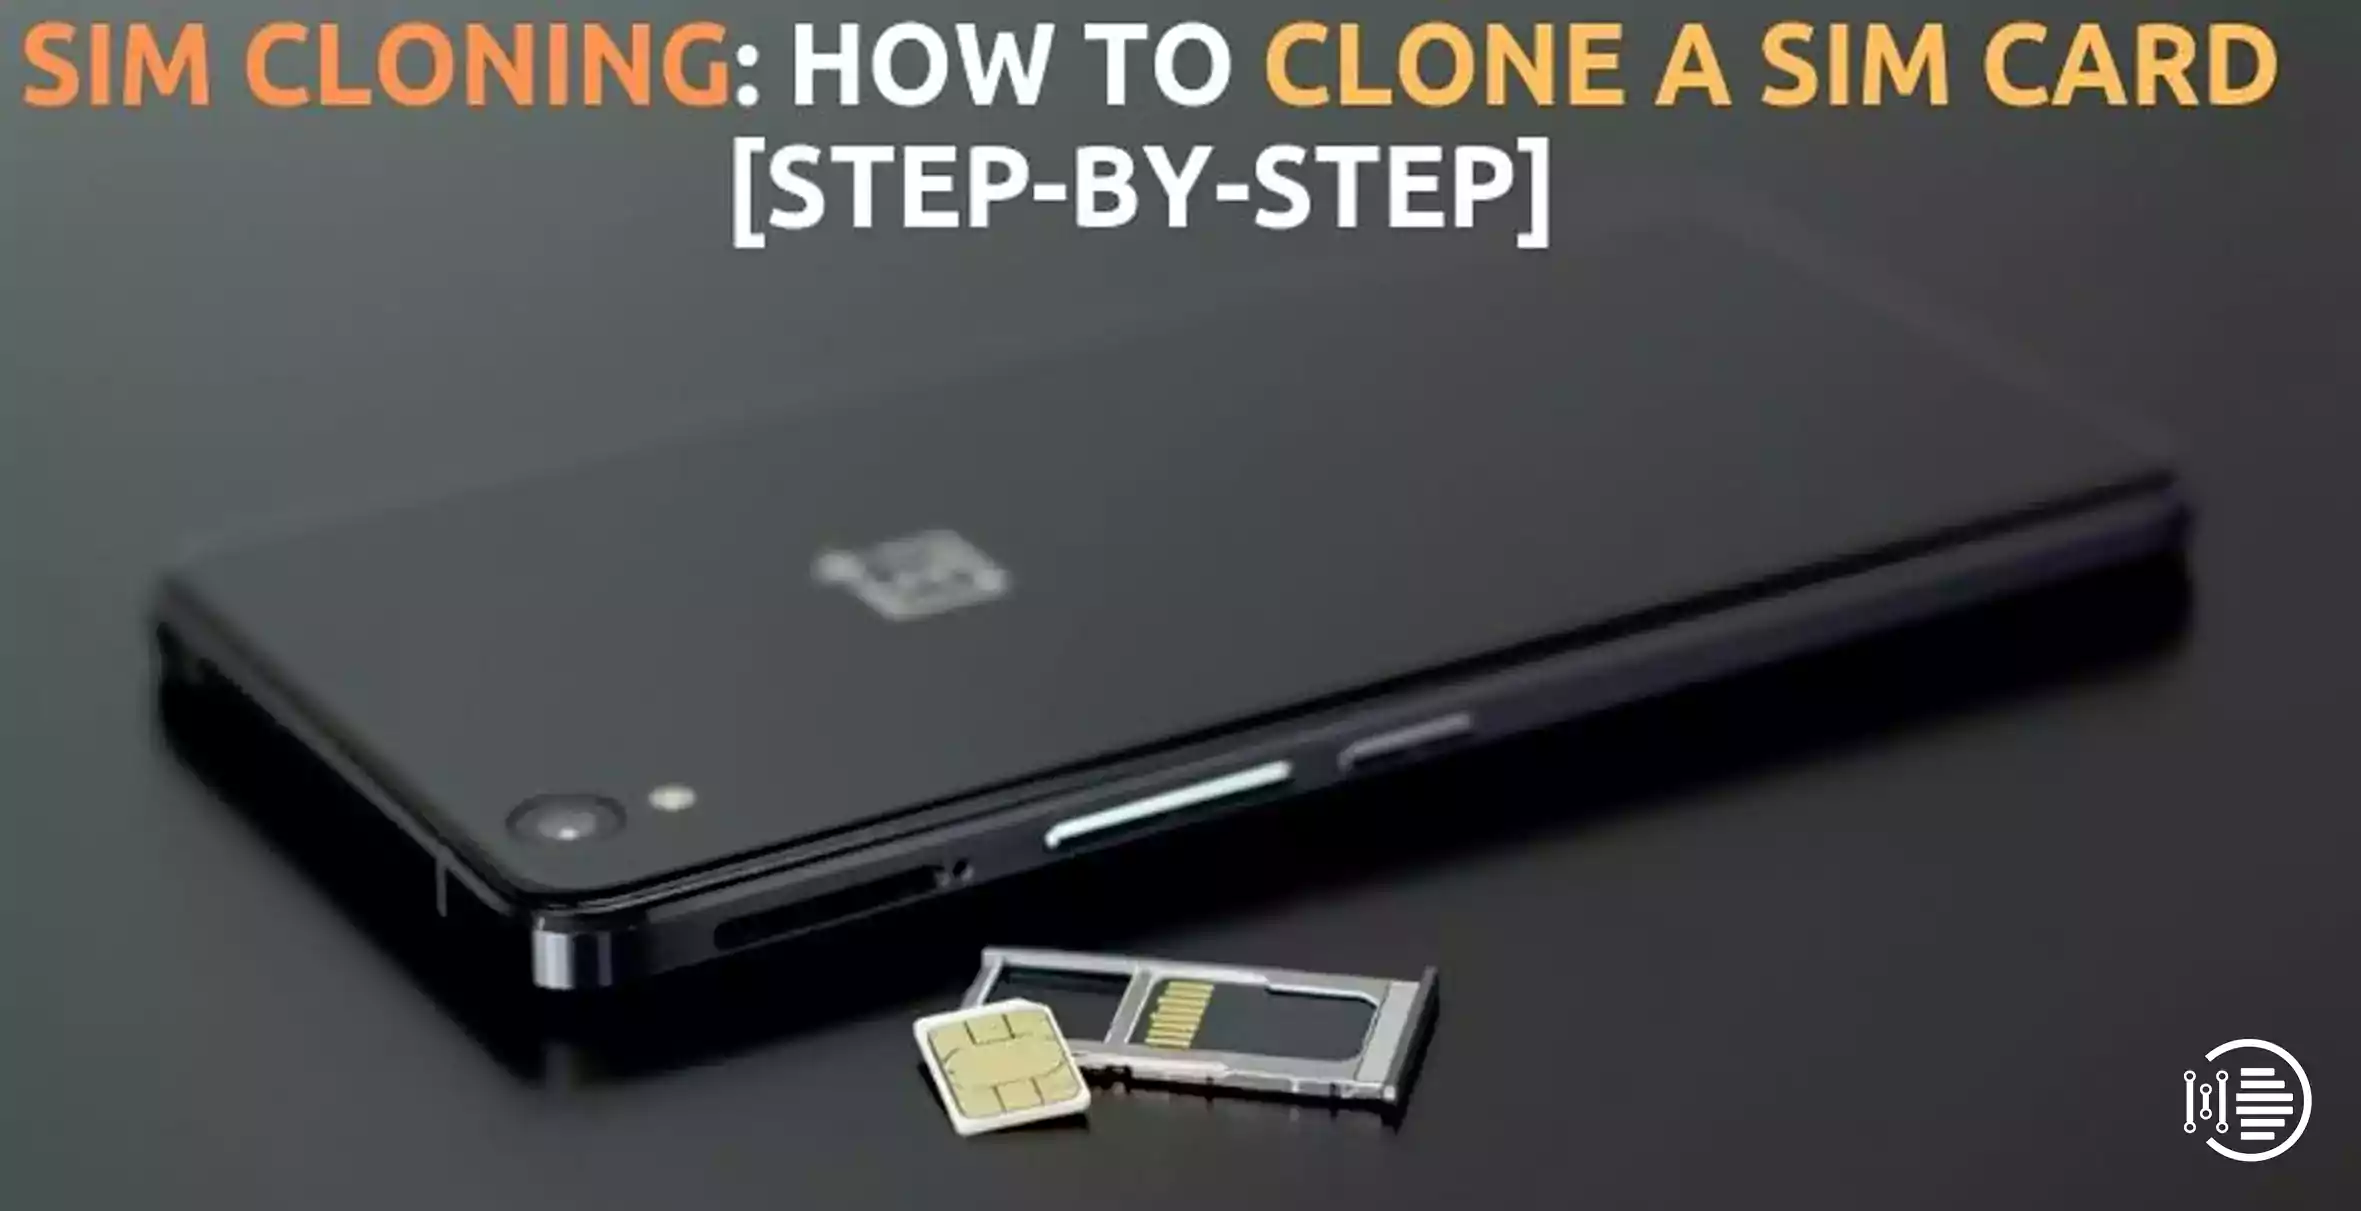 How to clone sim card in 15 minutes